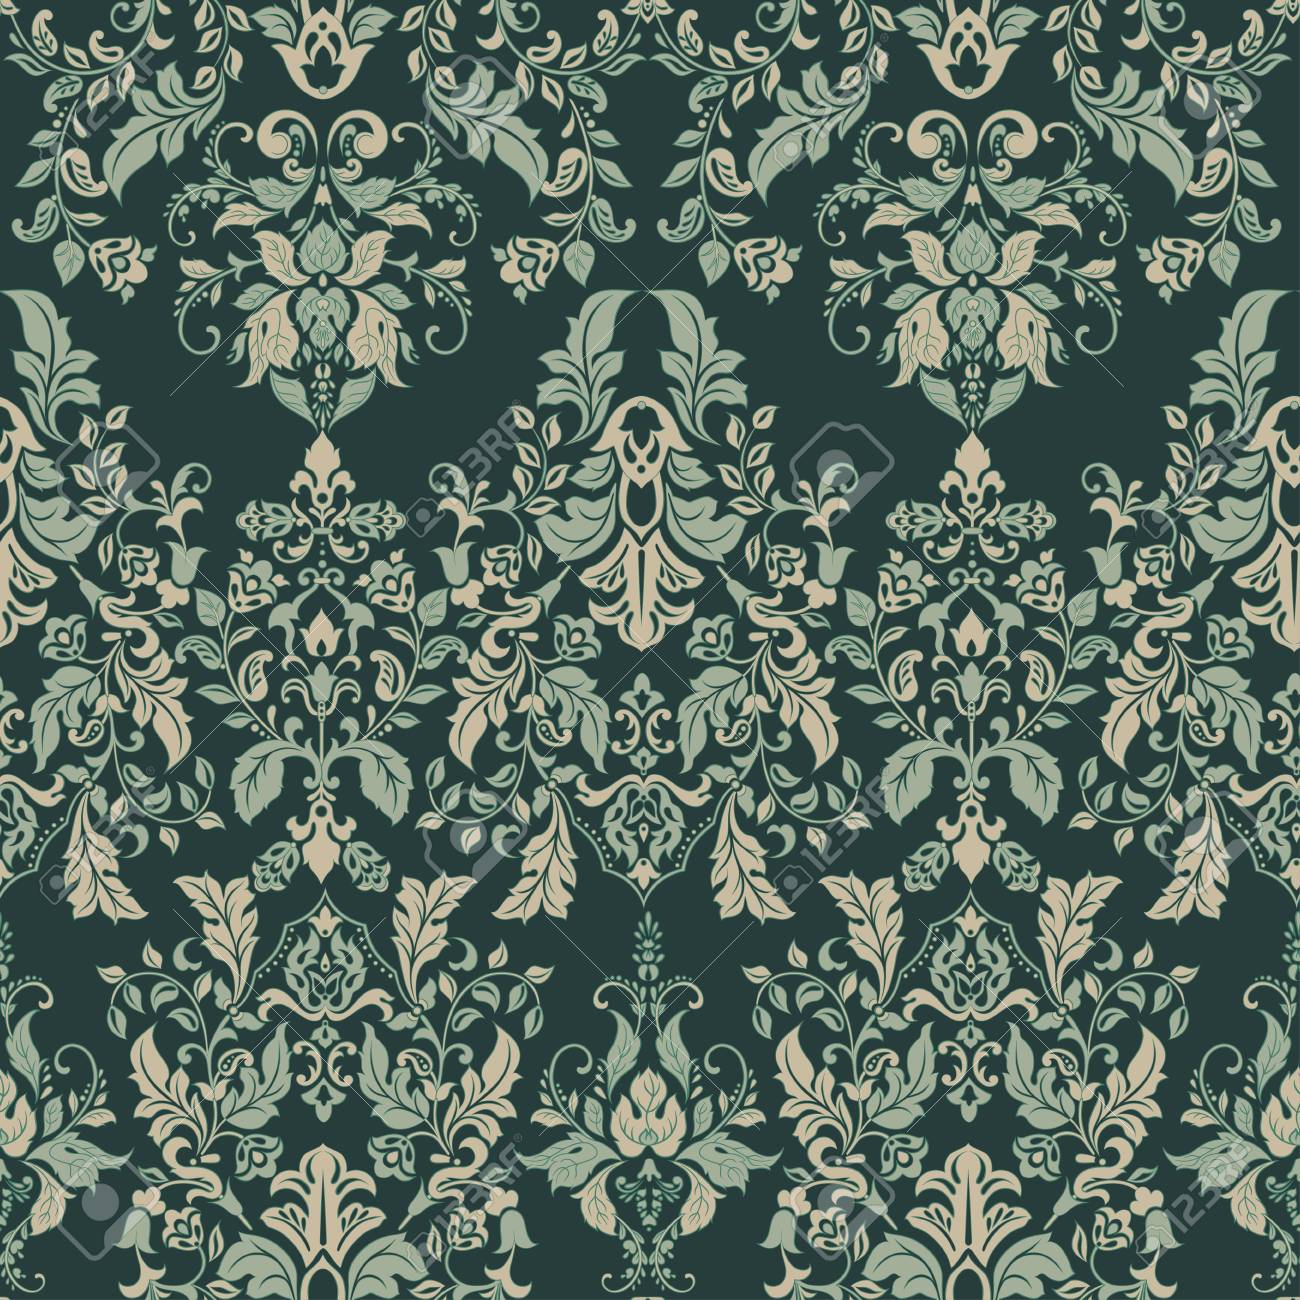 122789602-vector-illustration-texture-for-wallpapers-fabric-patterns-baroque-damask-seamless-floral-pattern-